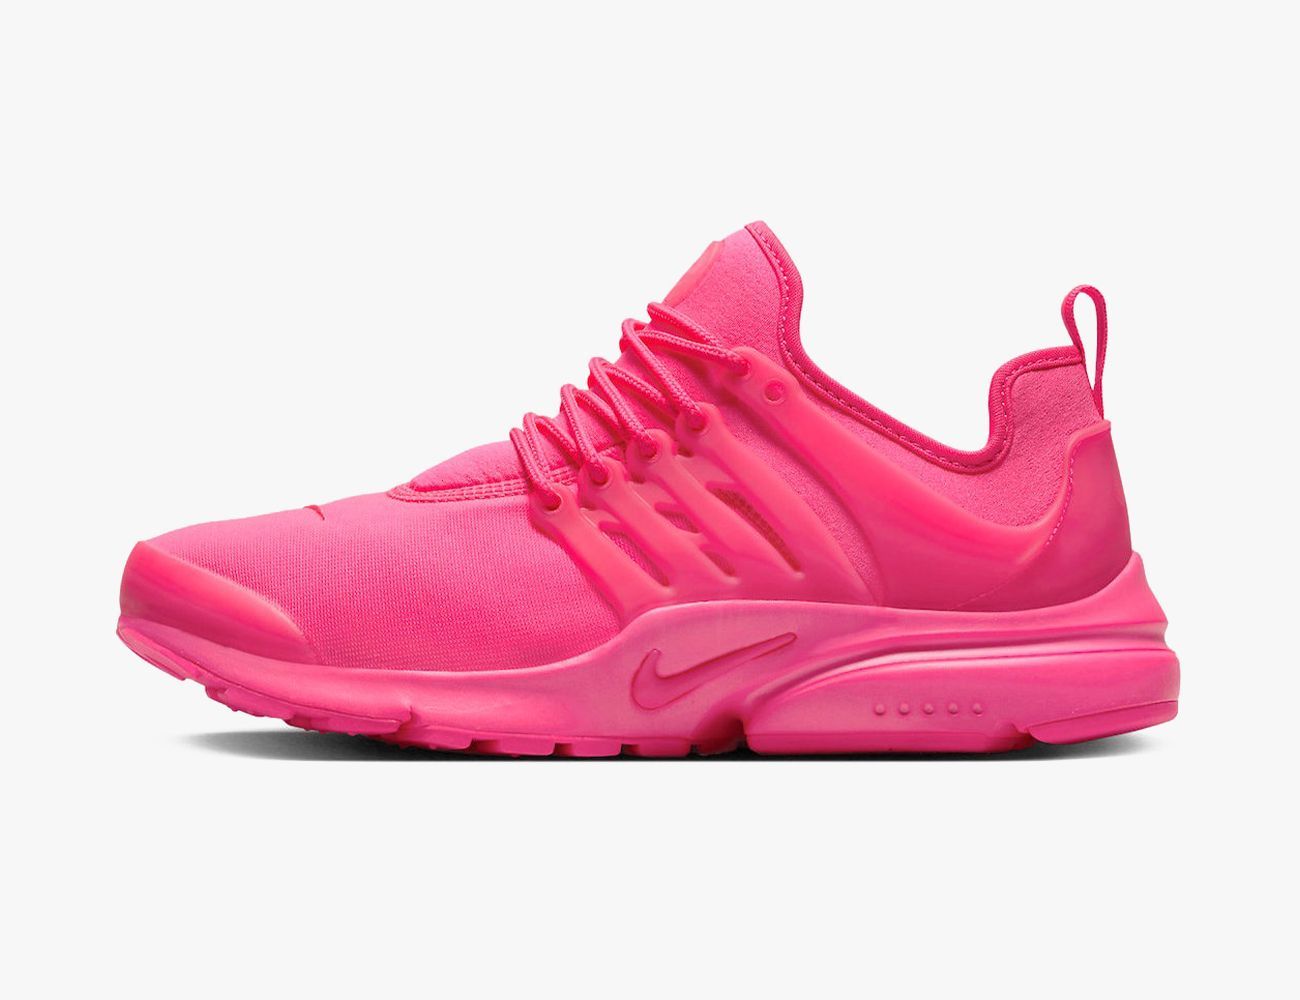 Nike Is Pushing Pink Shoes. Can the 